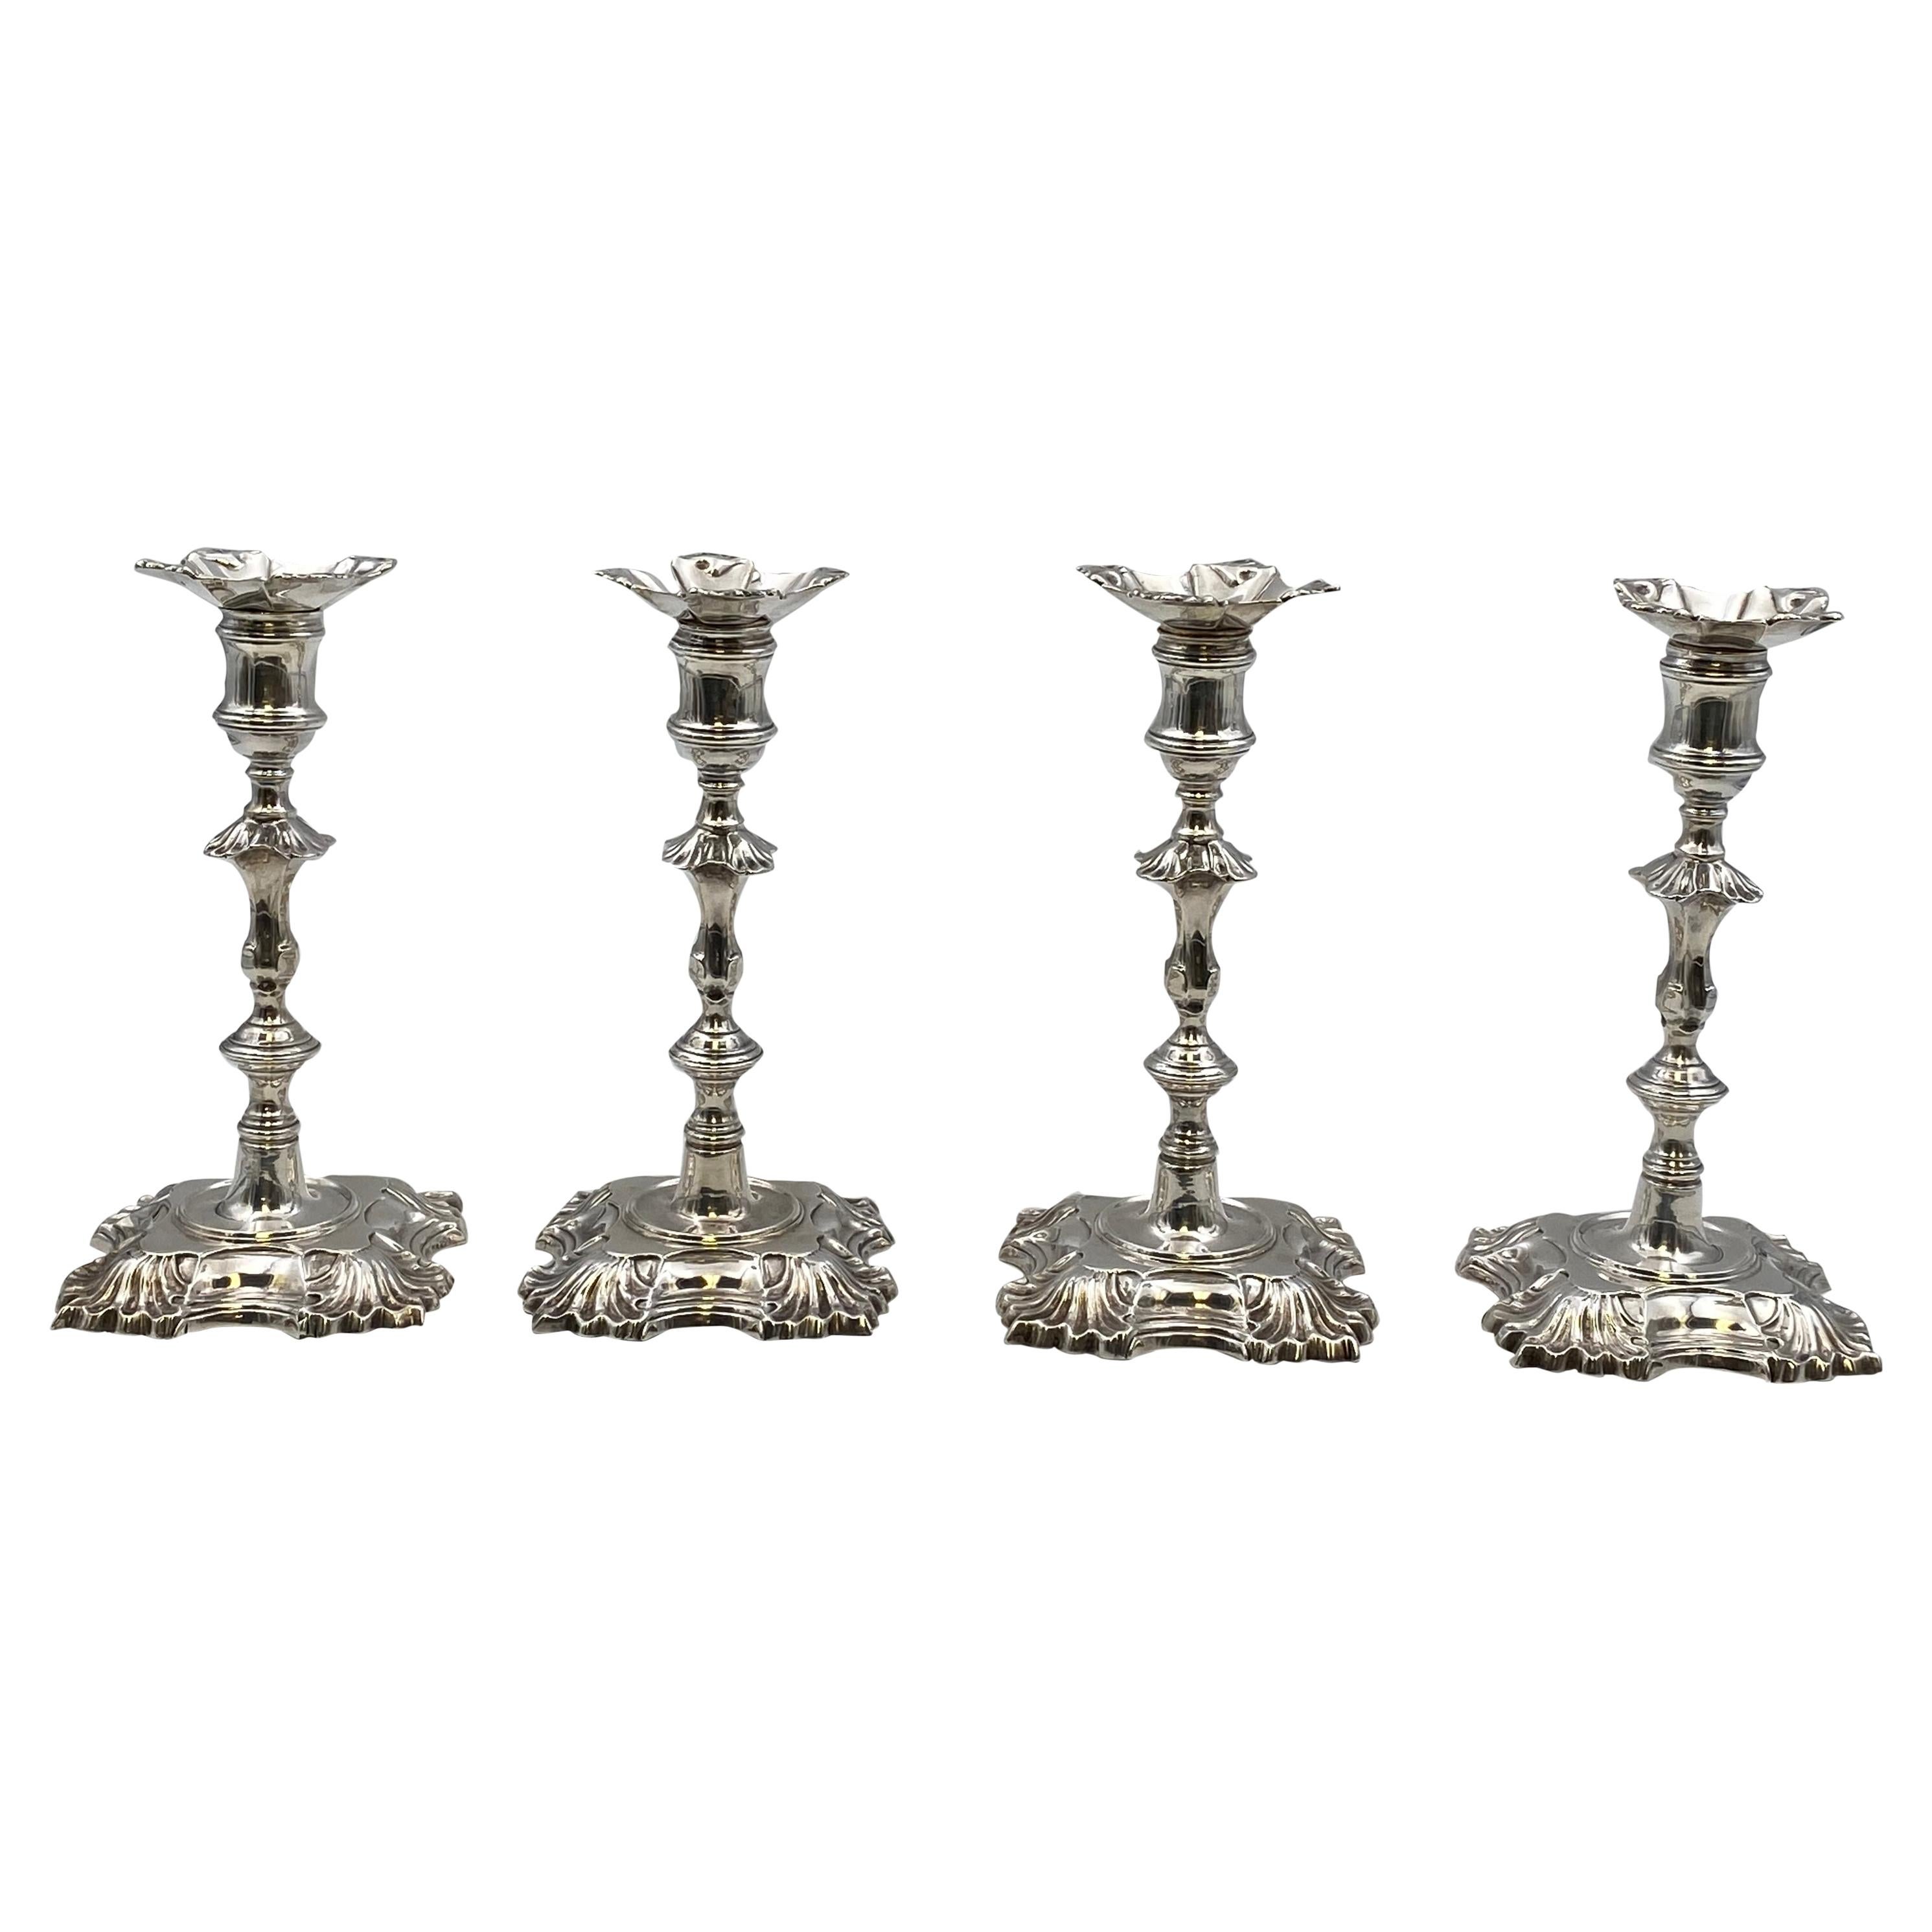 Set of 4 Georgian Style Sterling Silver Candlesticks